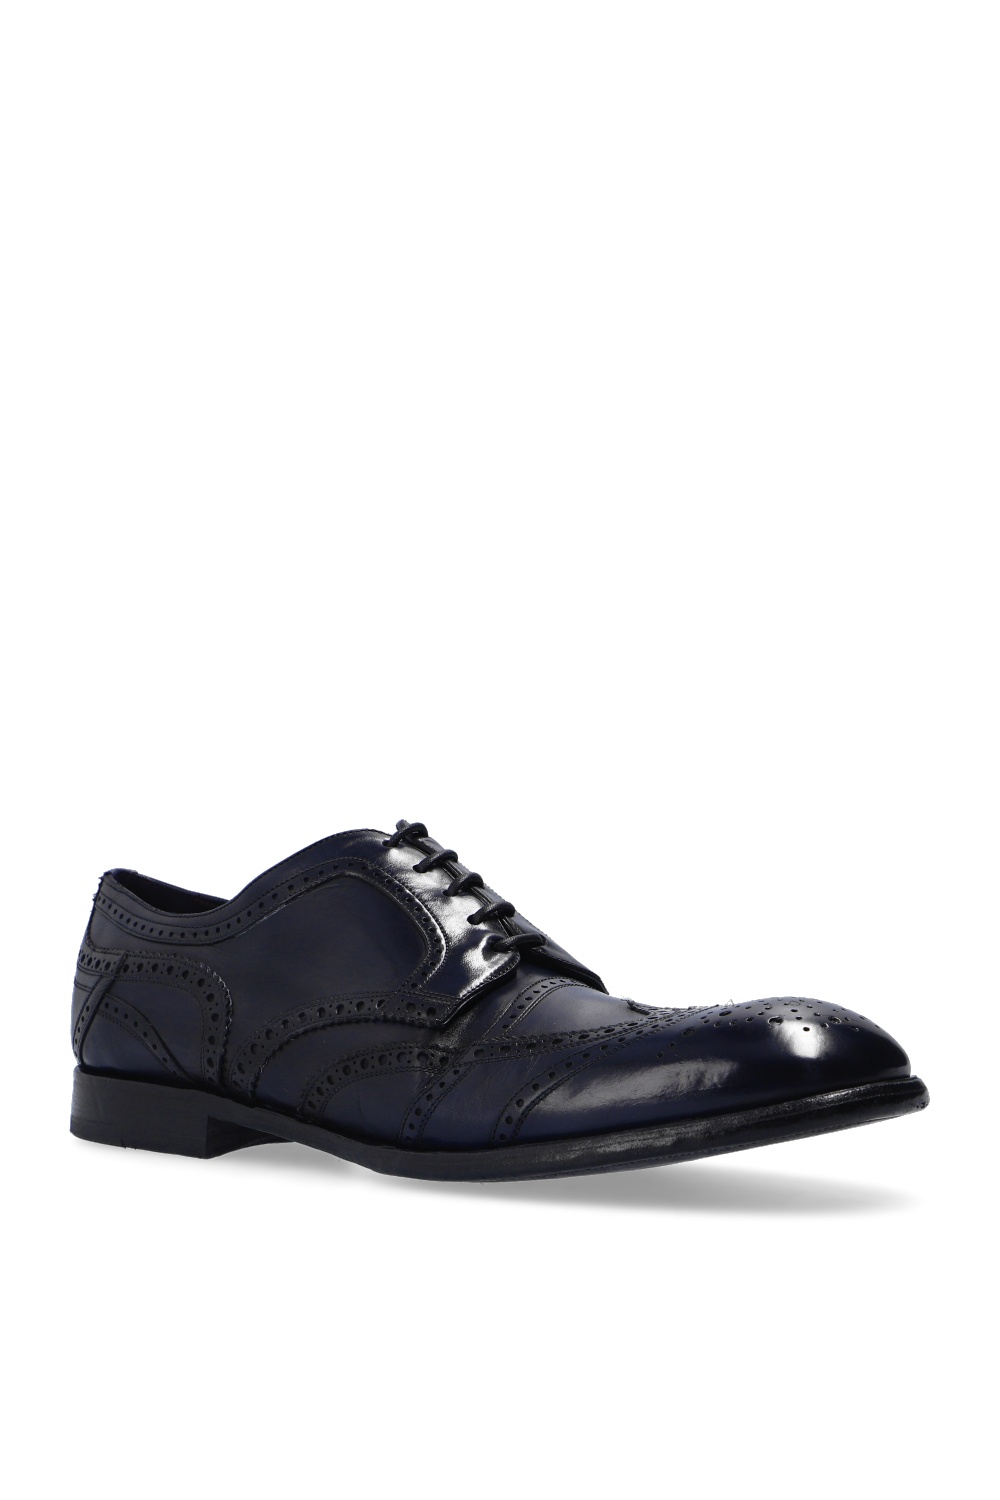 Shoes RAGE AGE RA-15-02-000076 101 ‘Michelangelo’ derby shoes